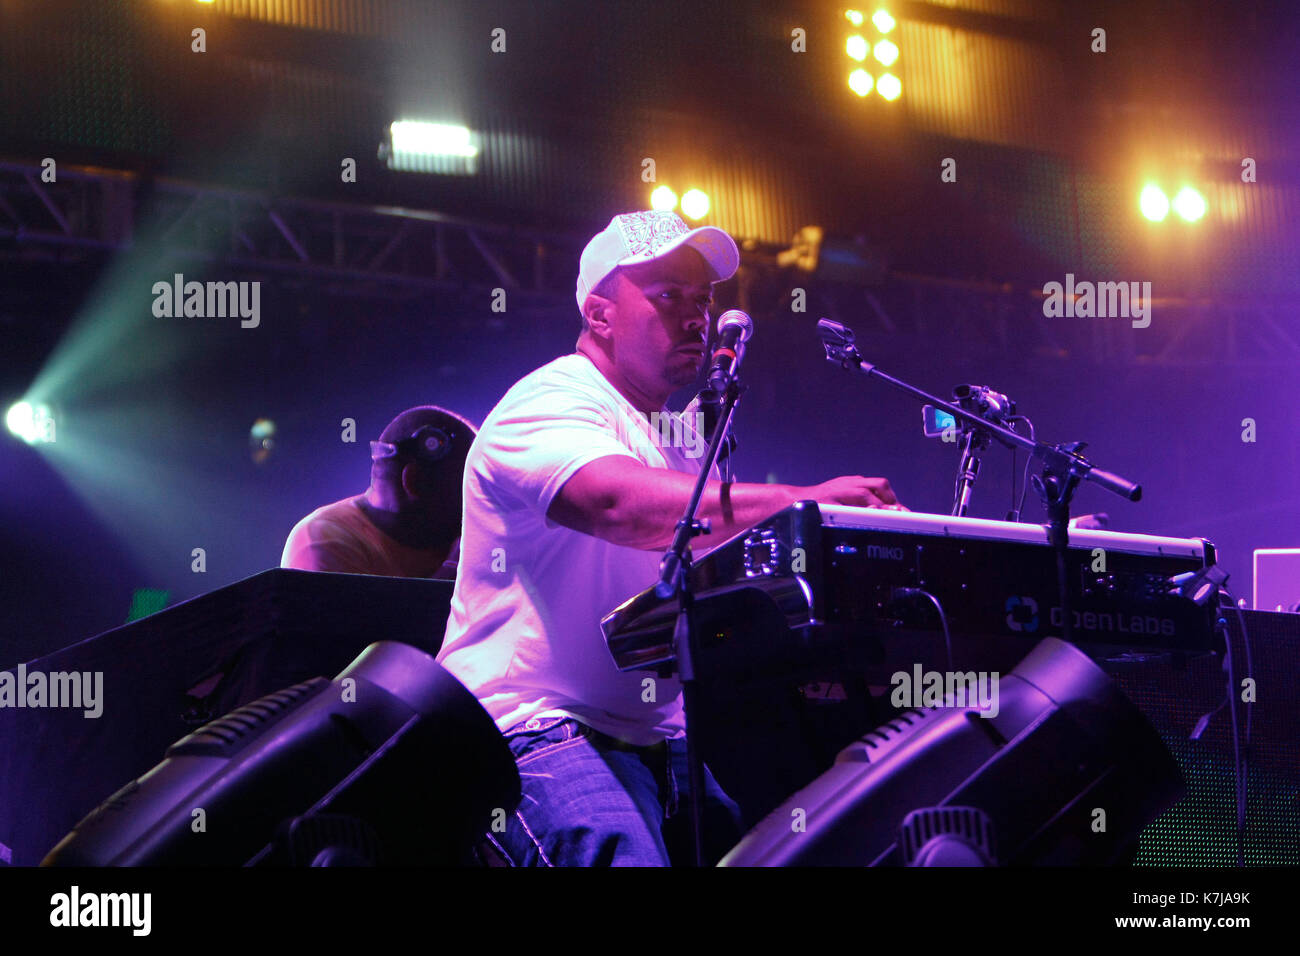 vacante Dominante Polinizador Miami, FL - March 28 : Timberland- pictured at the Ultra Music Festival in  Bicentennial Park in Miami, Florida on March 28, 2009Credit: Majo  Grossi/MediaPunch Stock Photo - Alamy